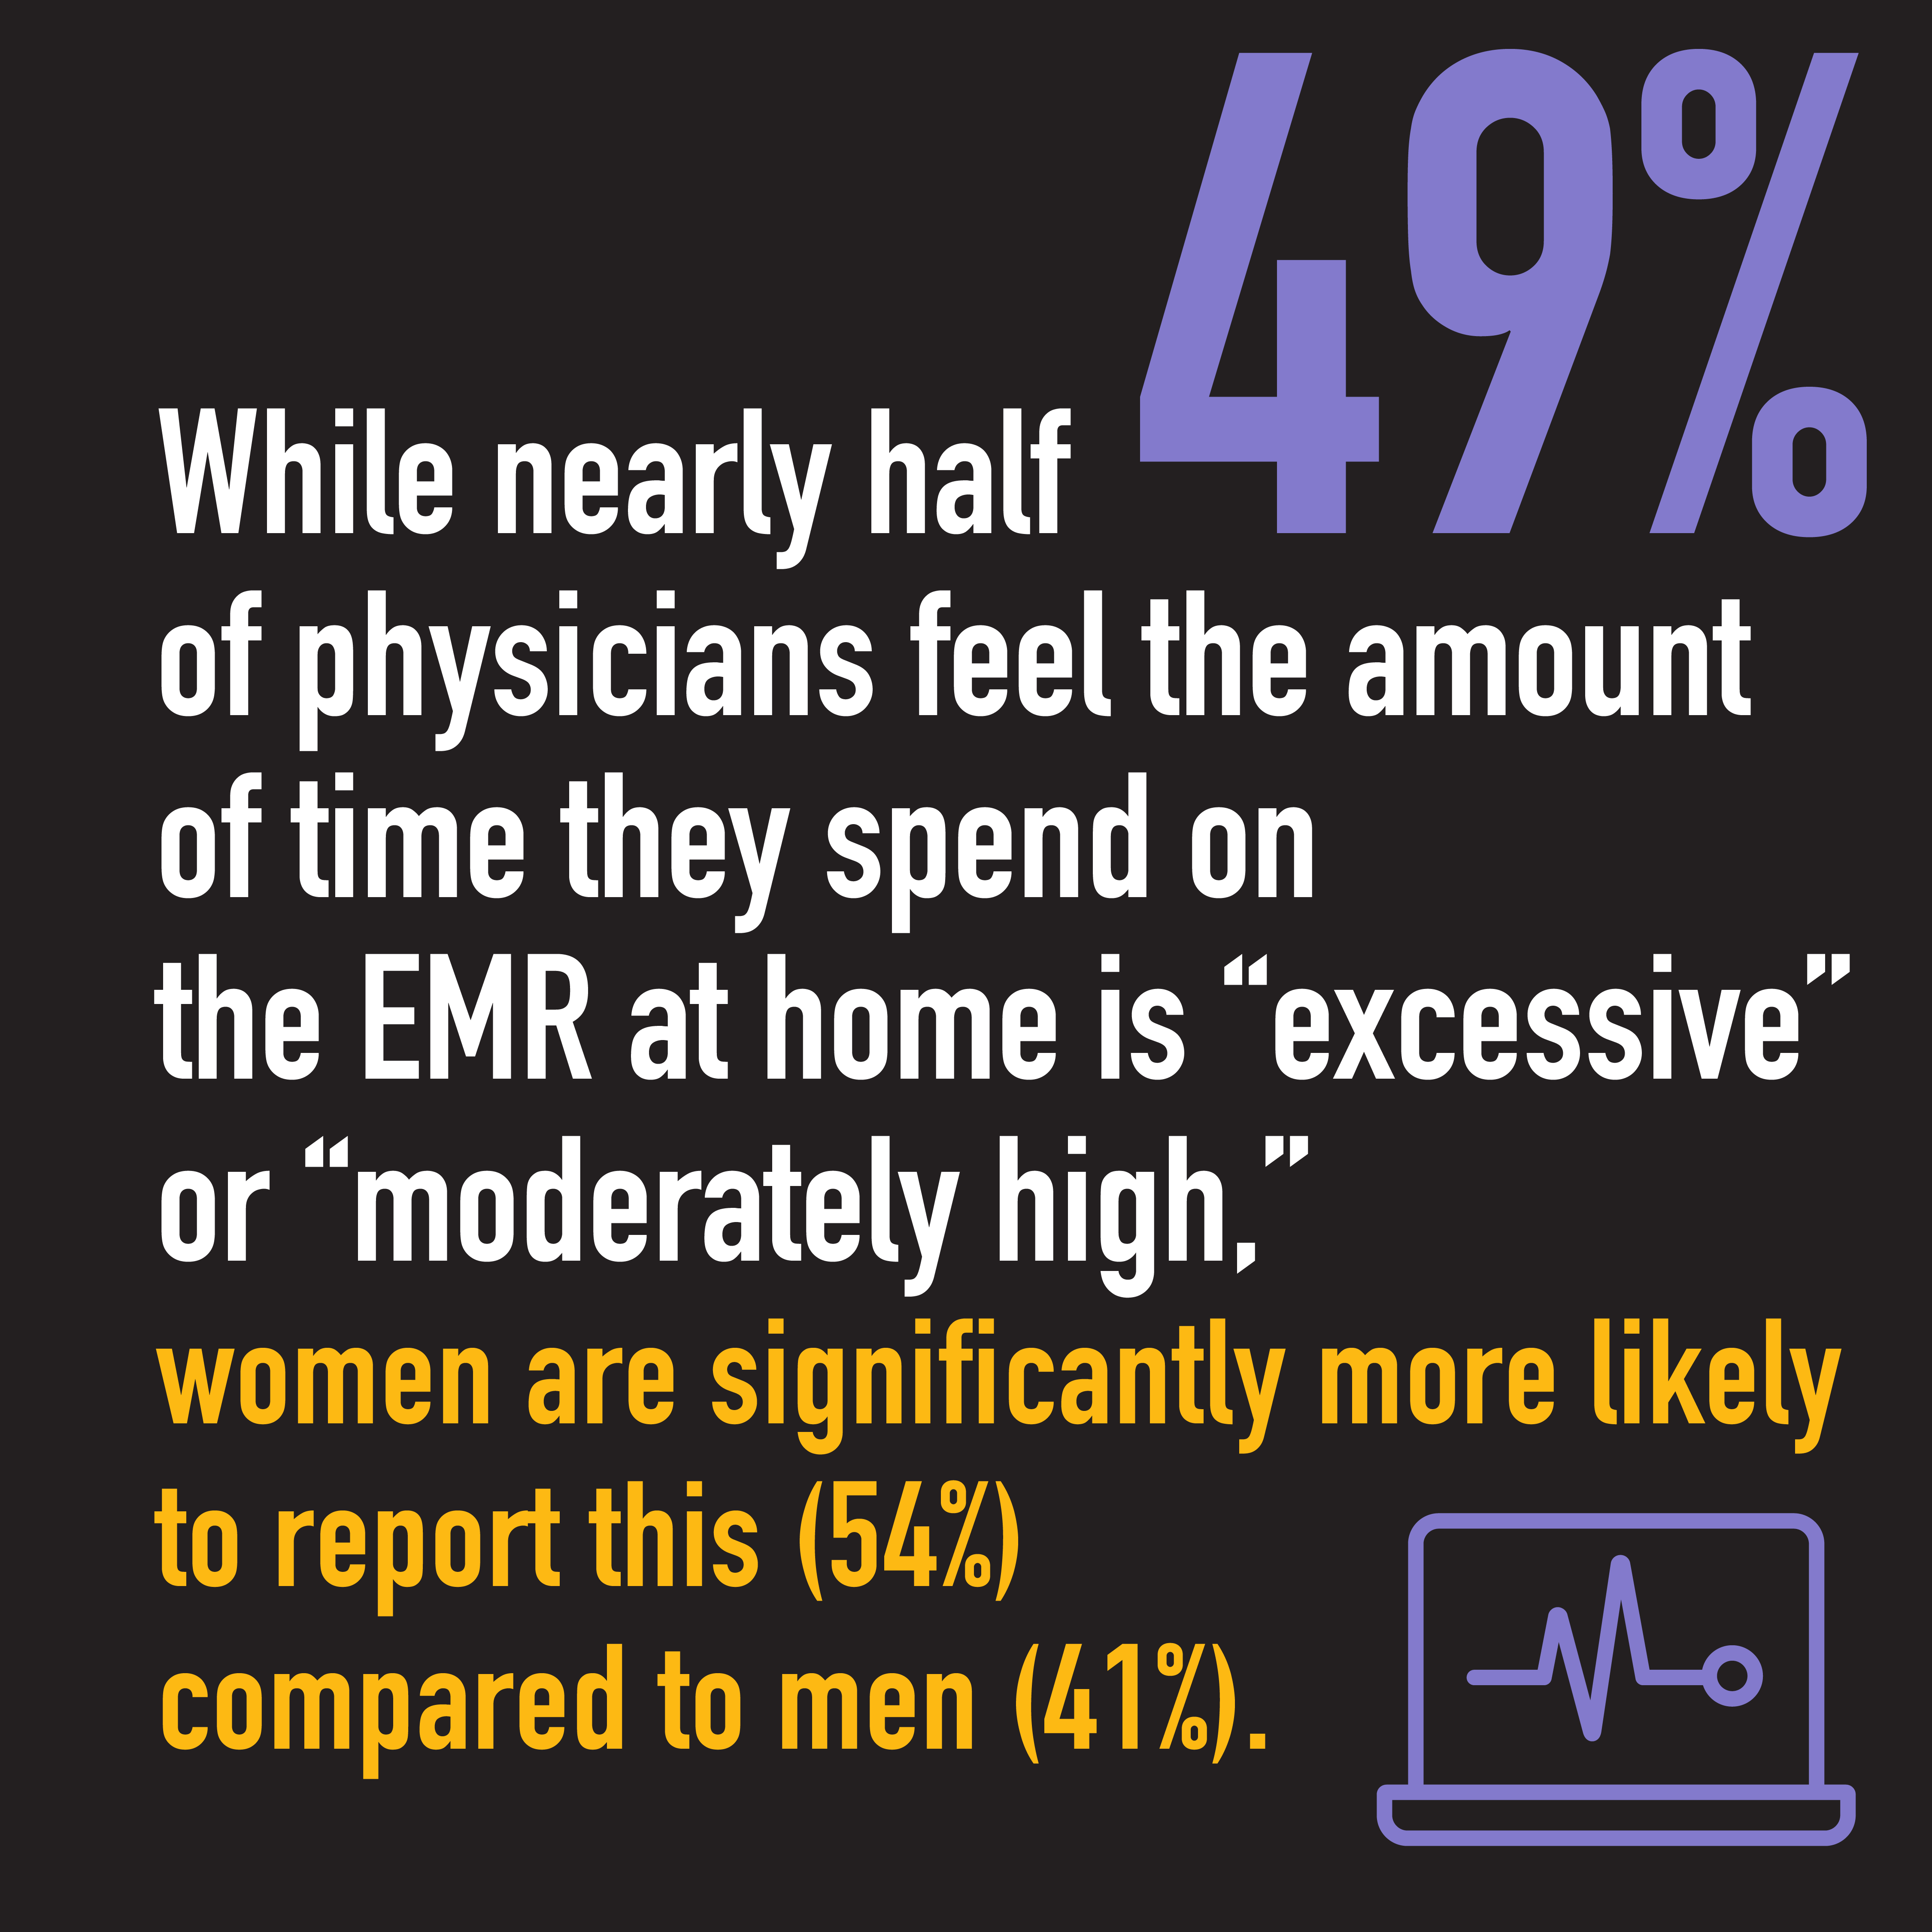 While nearly half of physicians feel the amount of time they spend on the EMR at home is excessive or moderately high, women are significantly more likely to report this (54%) compared to men (41%)